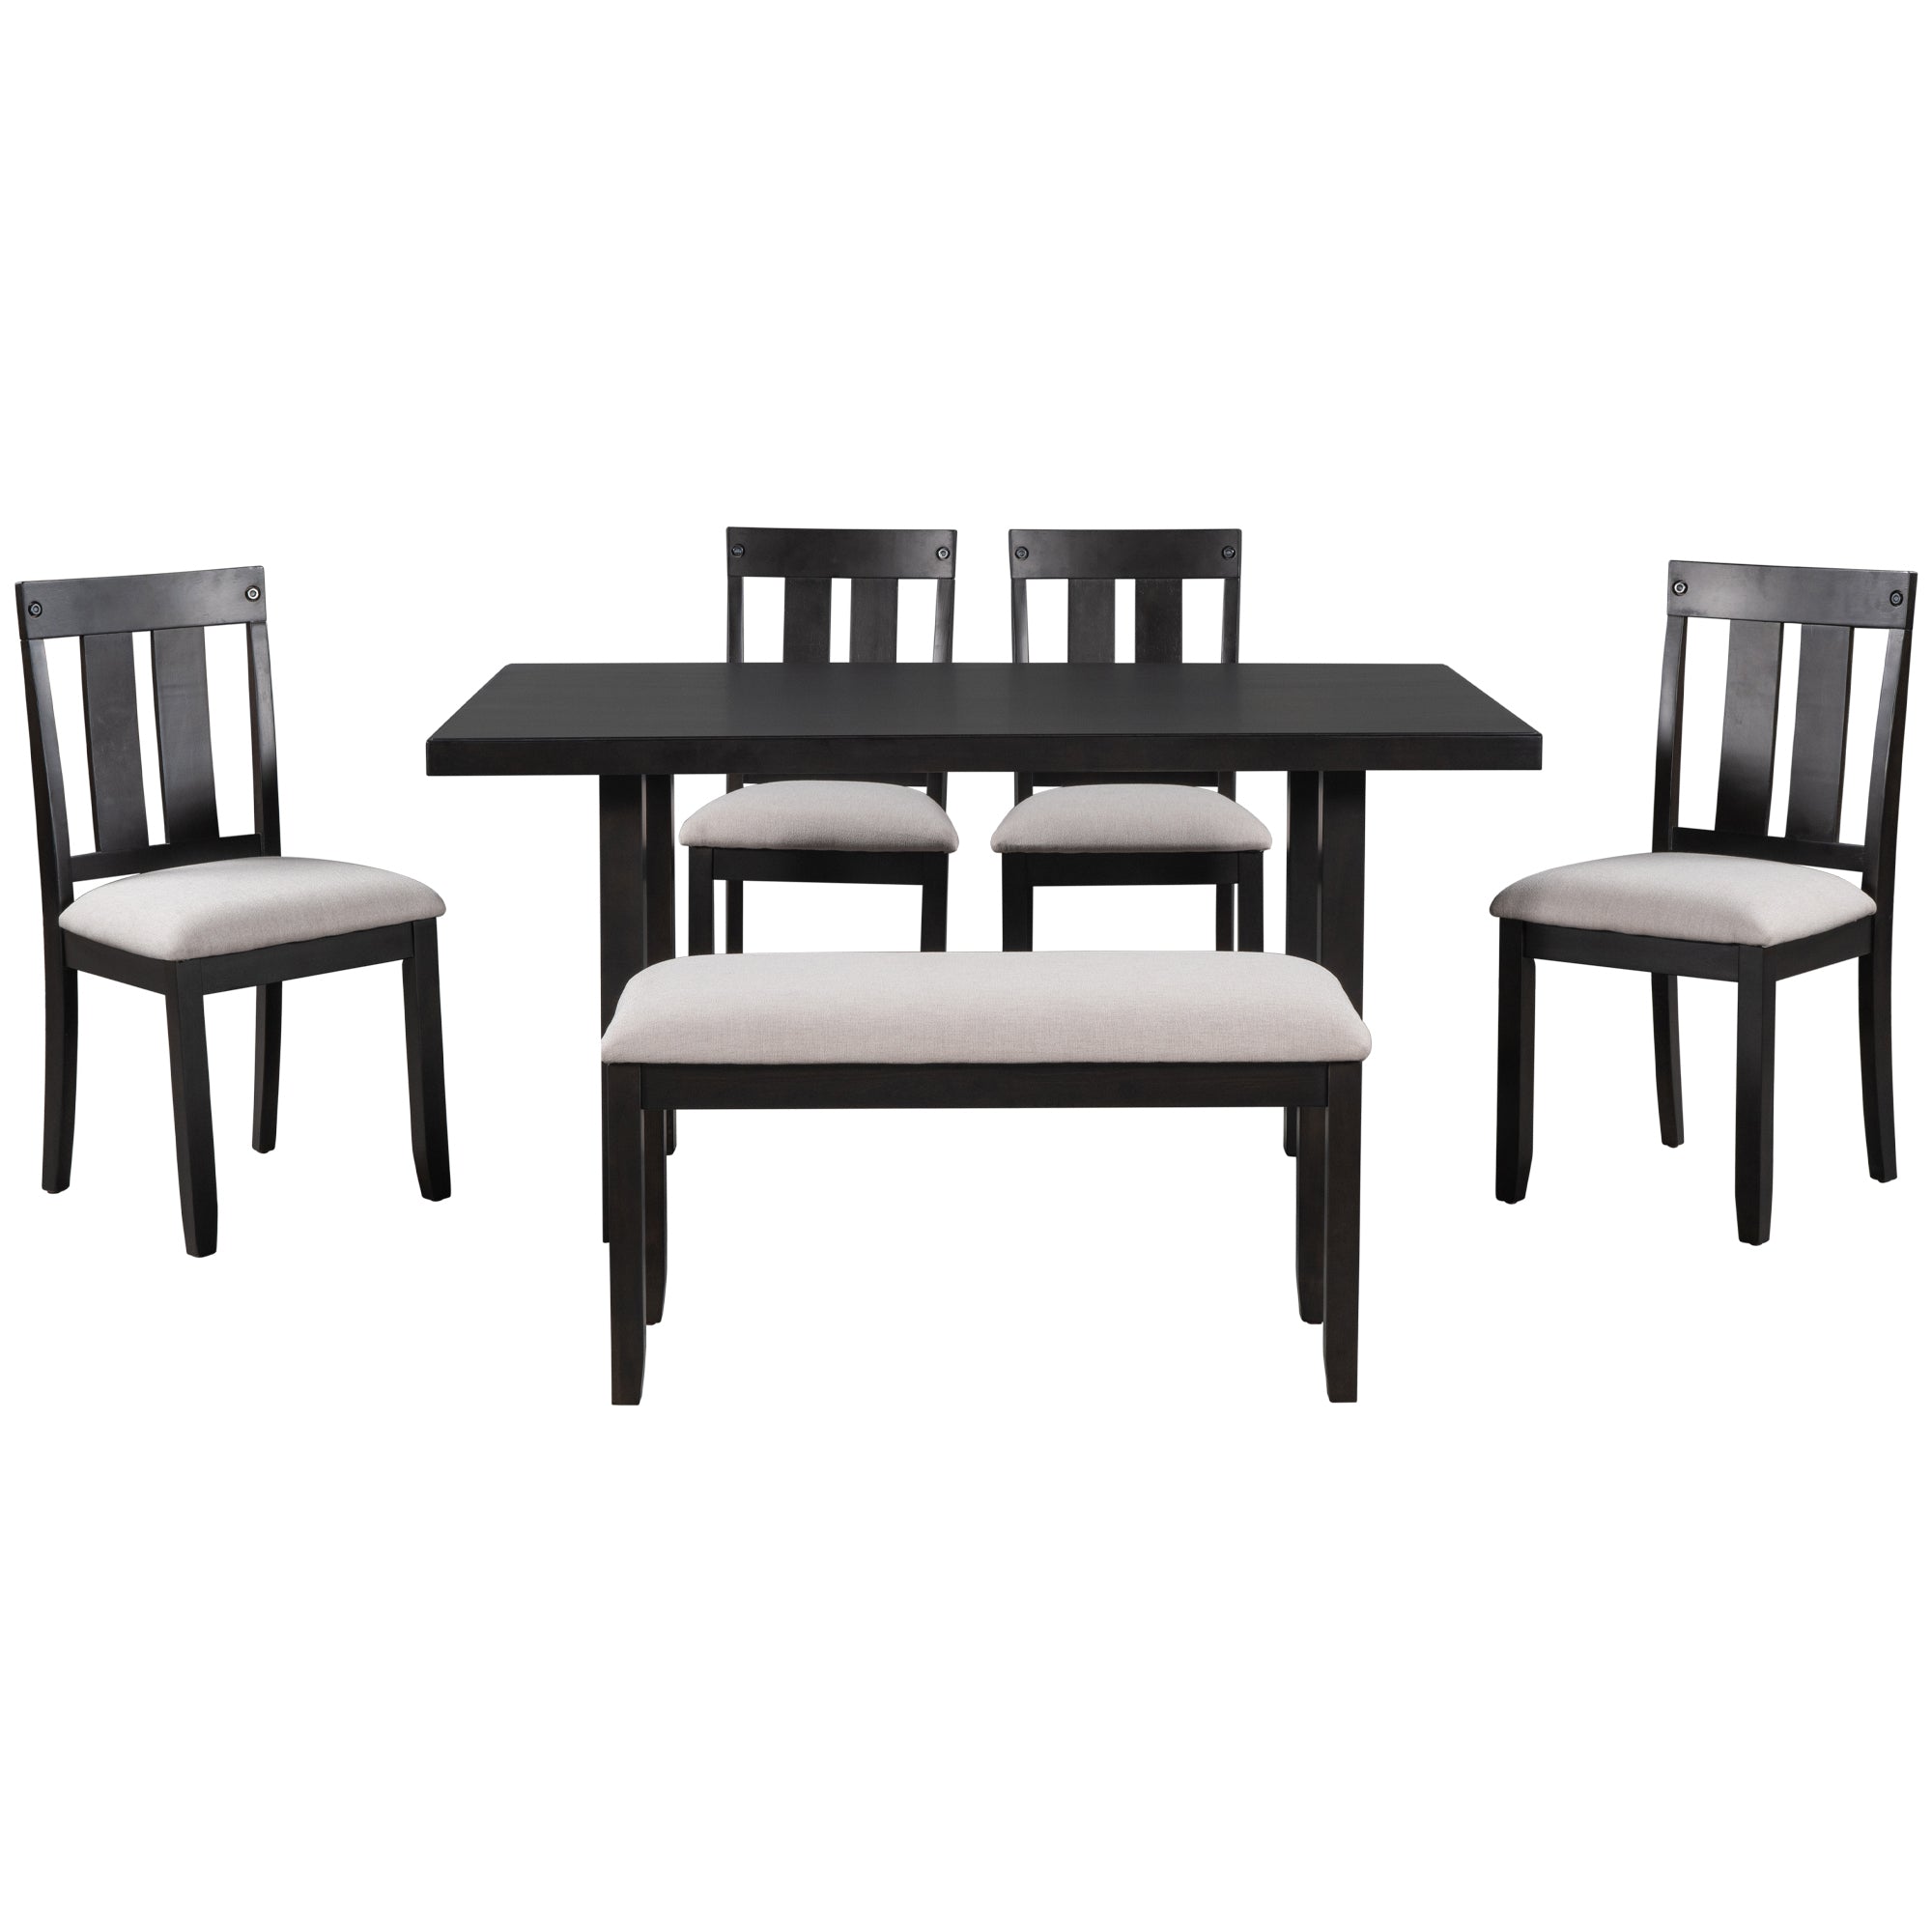 TREXM Rustic Farmhouse 6-Piece Wooden Rustic Style Dining Set, Including Table, 4 Chairs & Bench (Espresso)